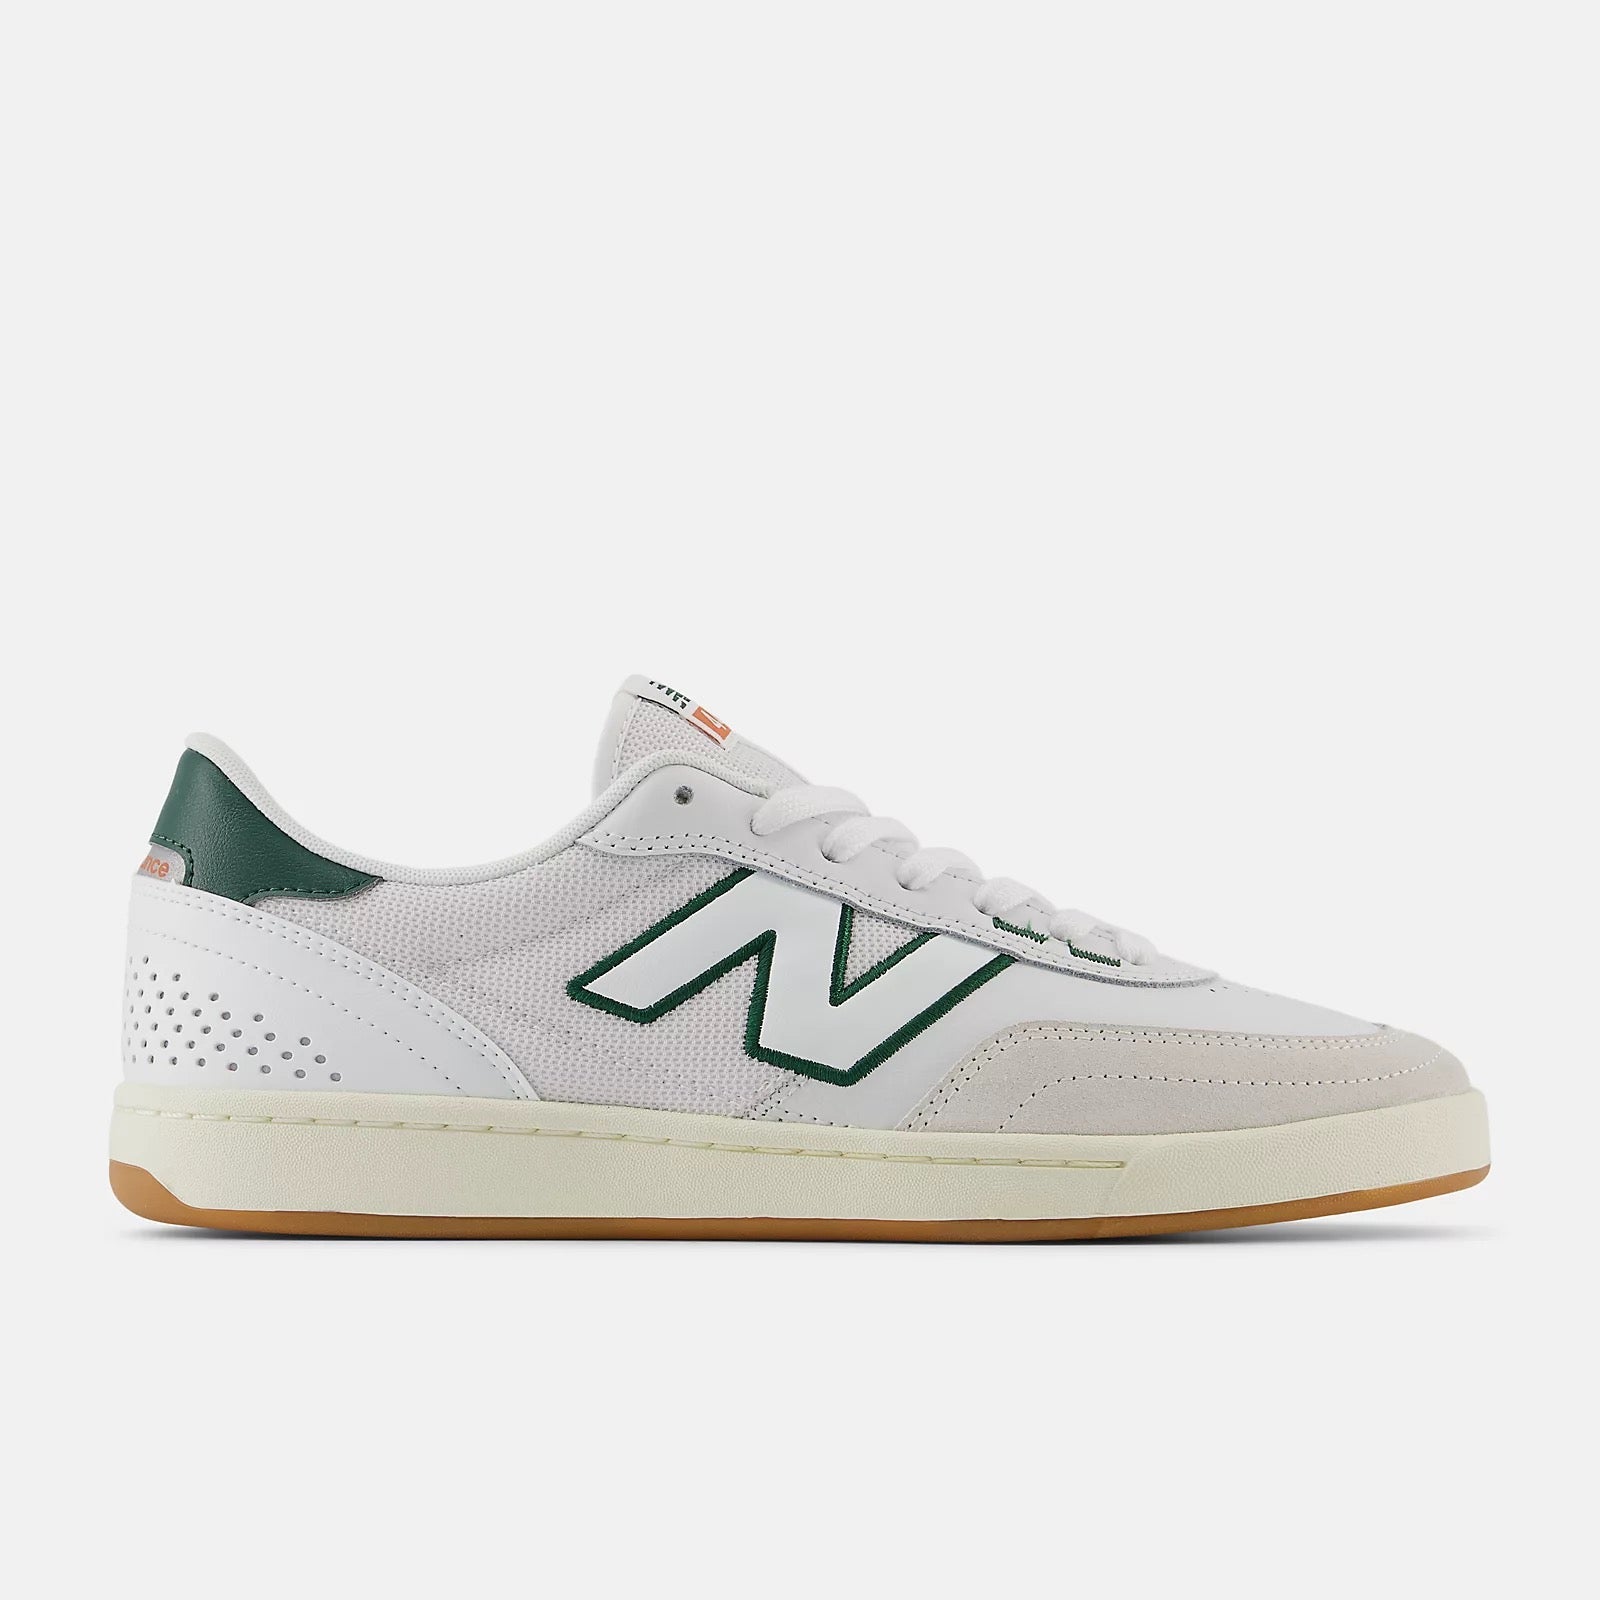 New Balance Numeric 440 V2 White with Forest Green